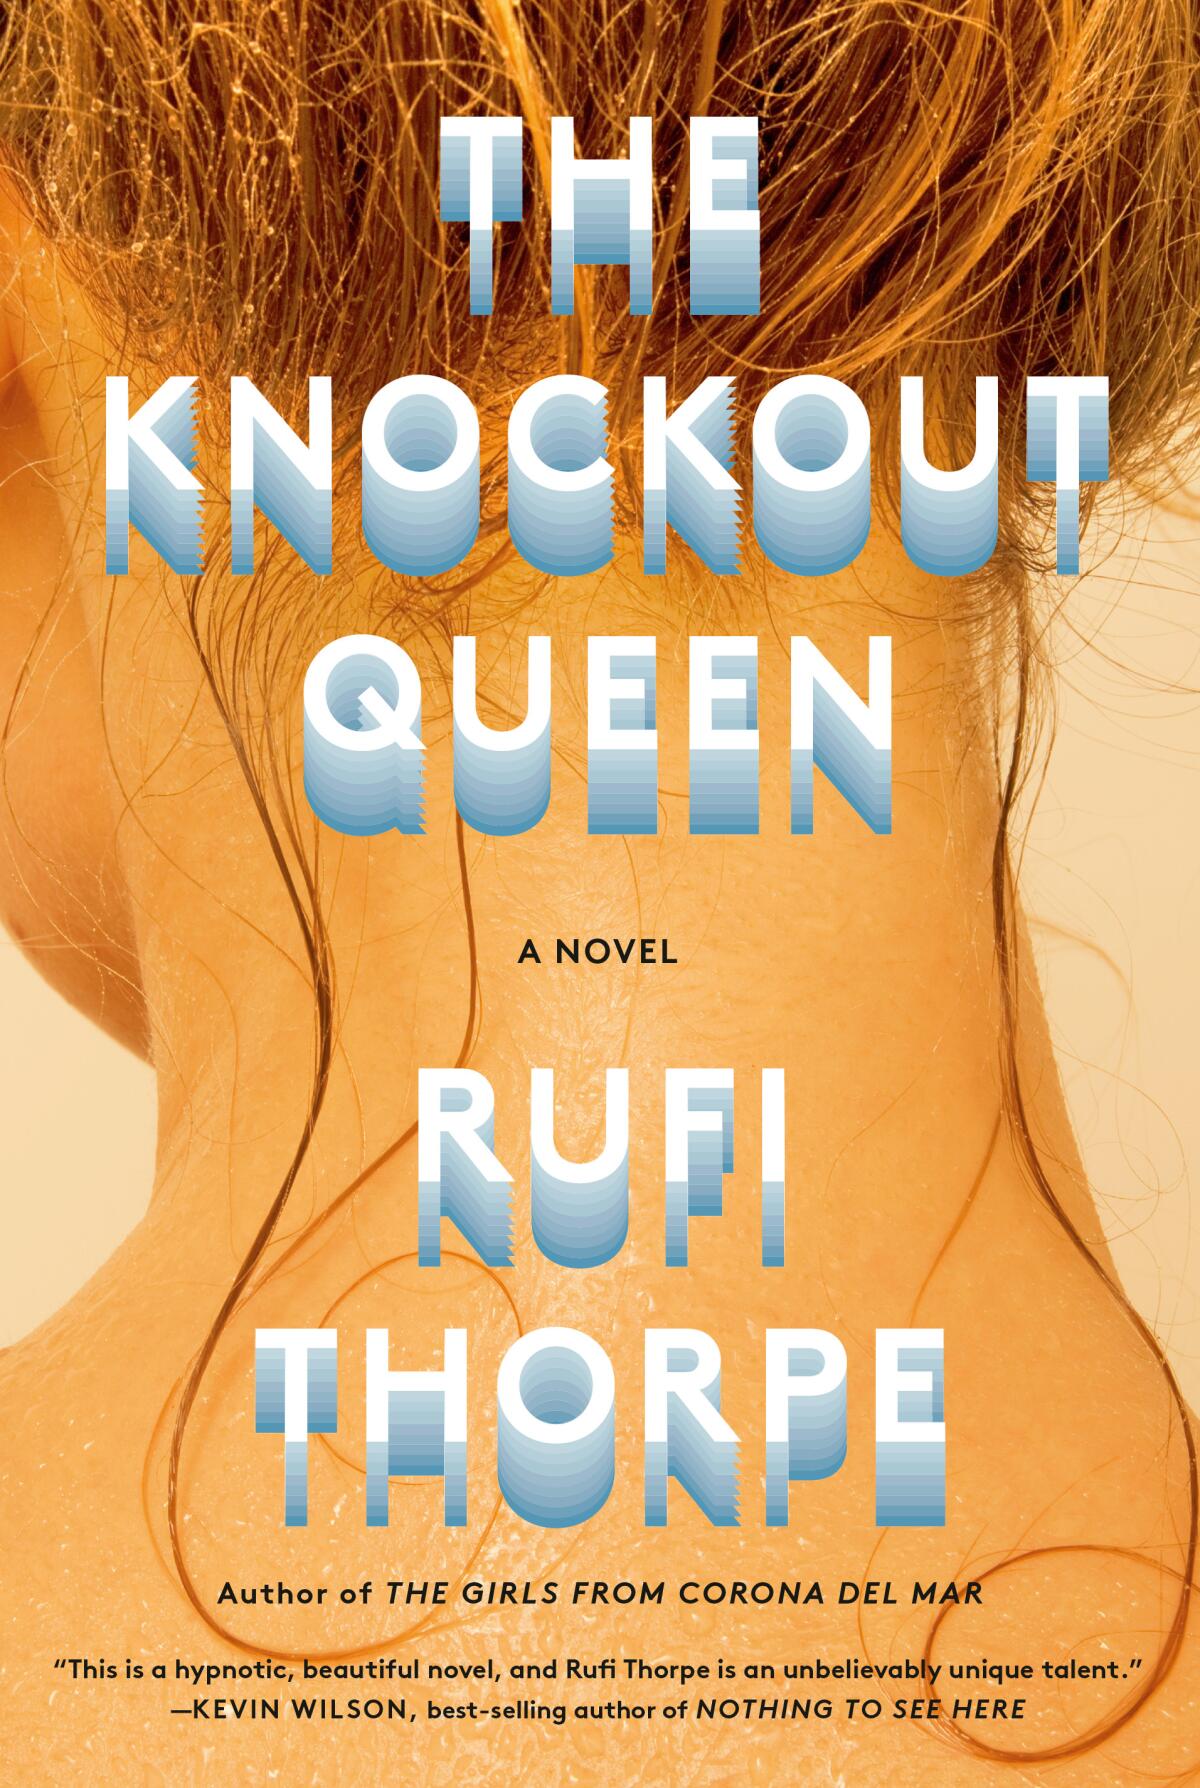 A book jacket for "The Knockout Queen," by Rufi Thorpe.